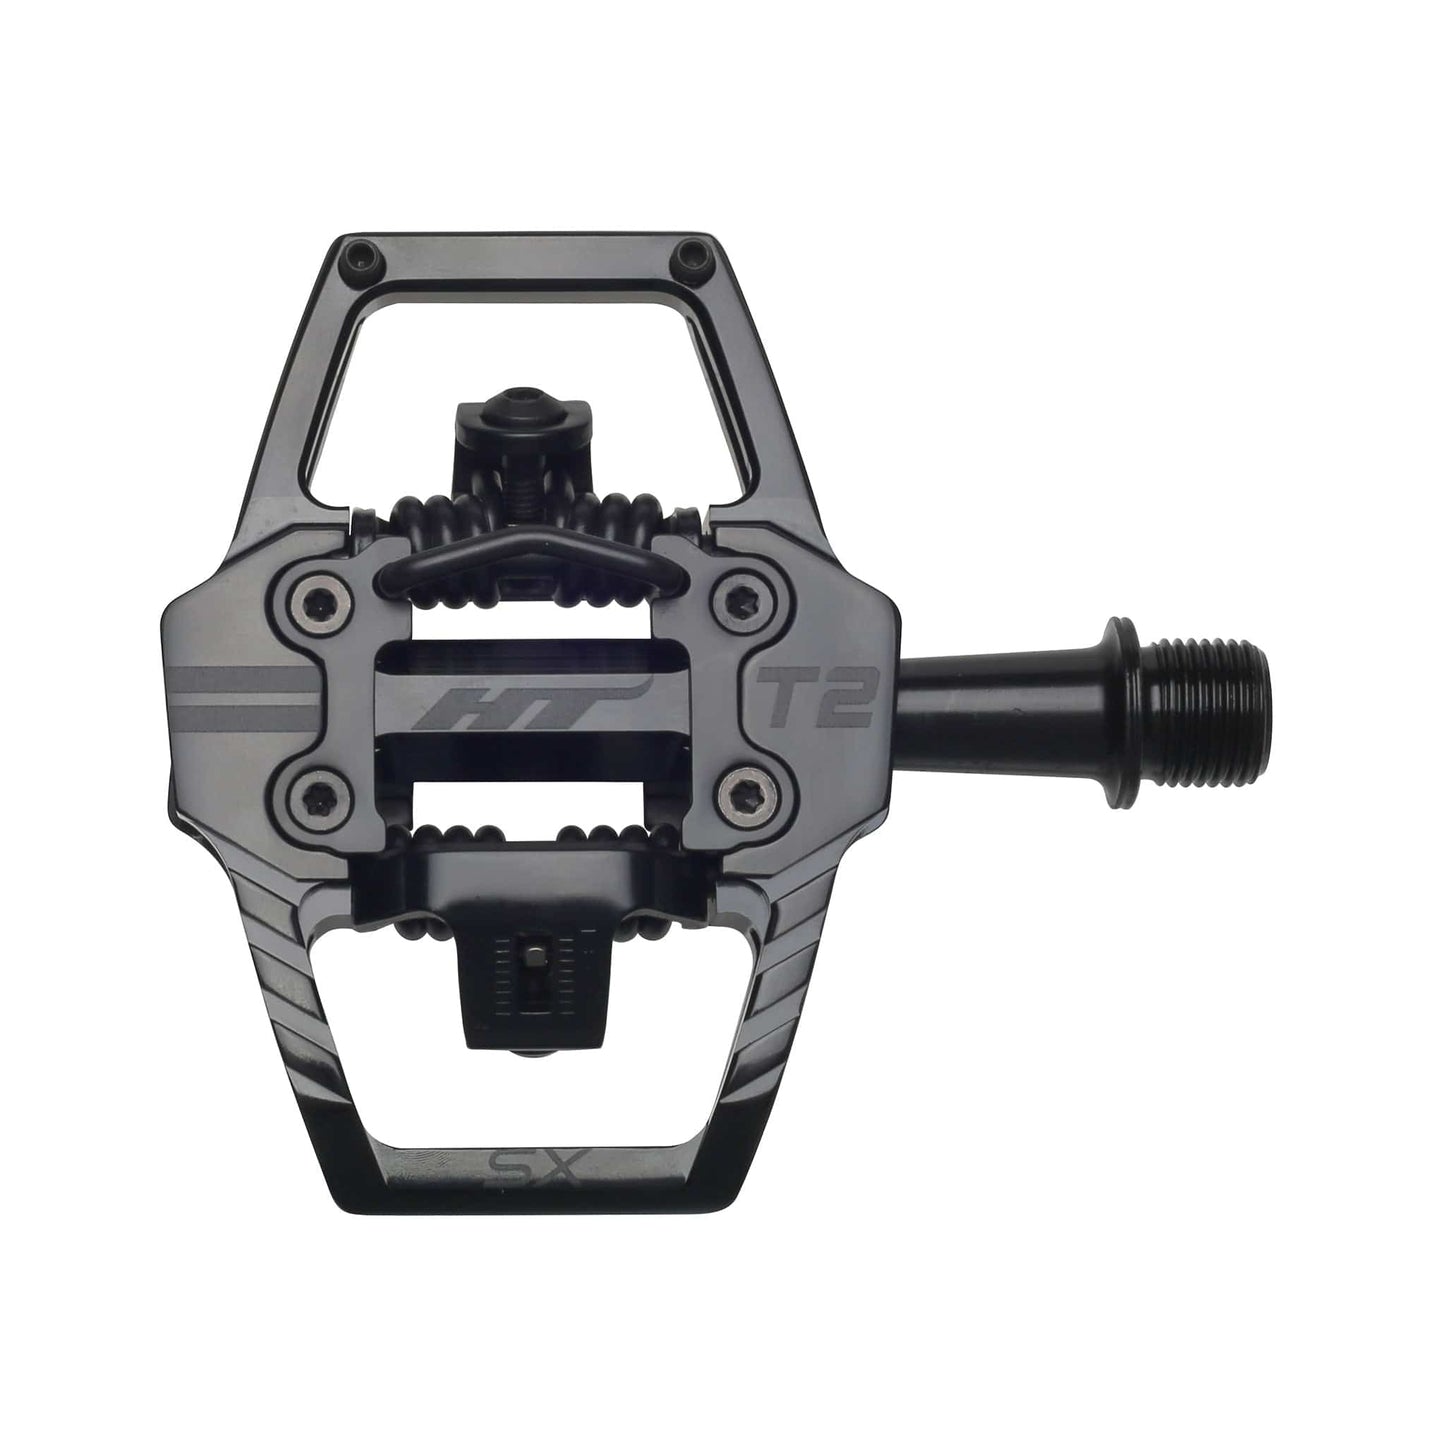 HT Pedals Clip-in Mountain Pedals T2-SX Clipless Platform Pedals, CrMo - Stealth Black